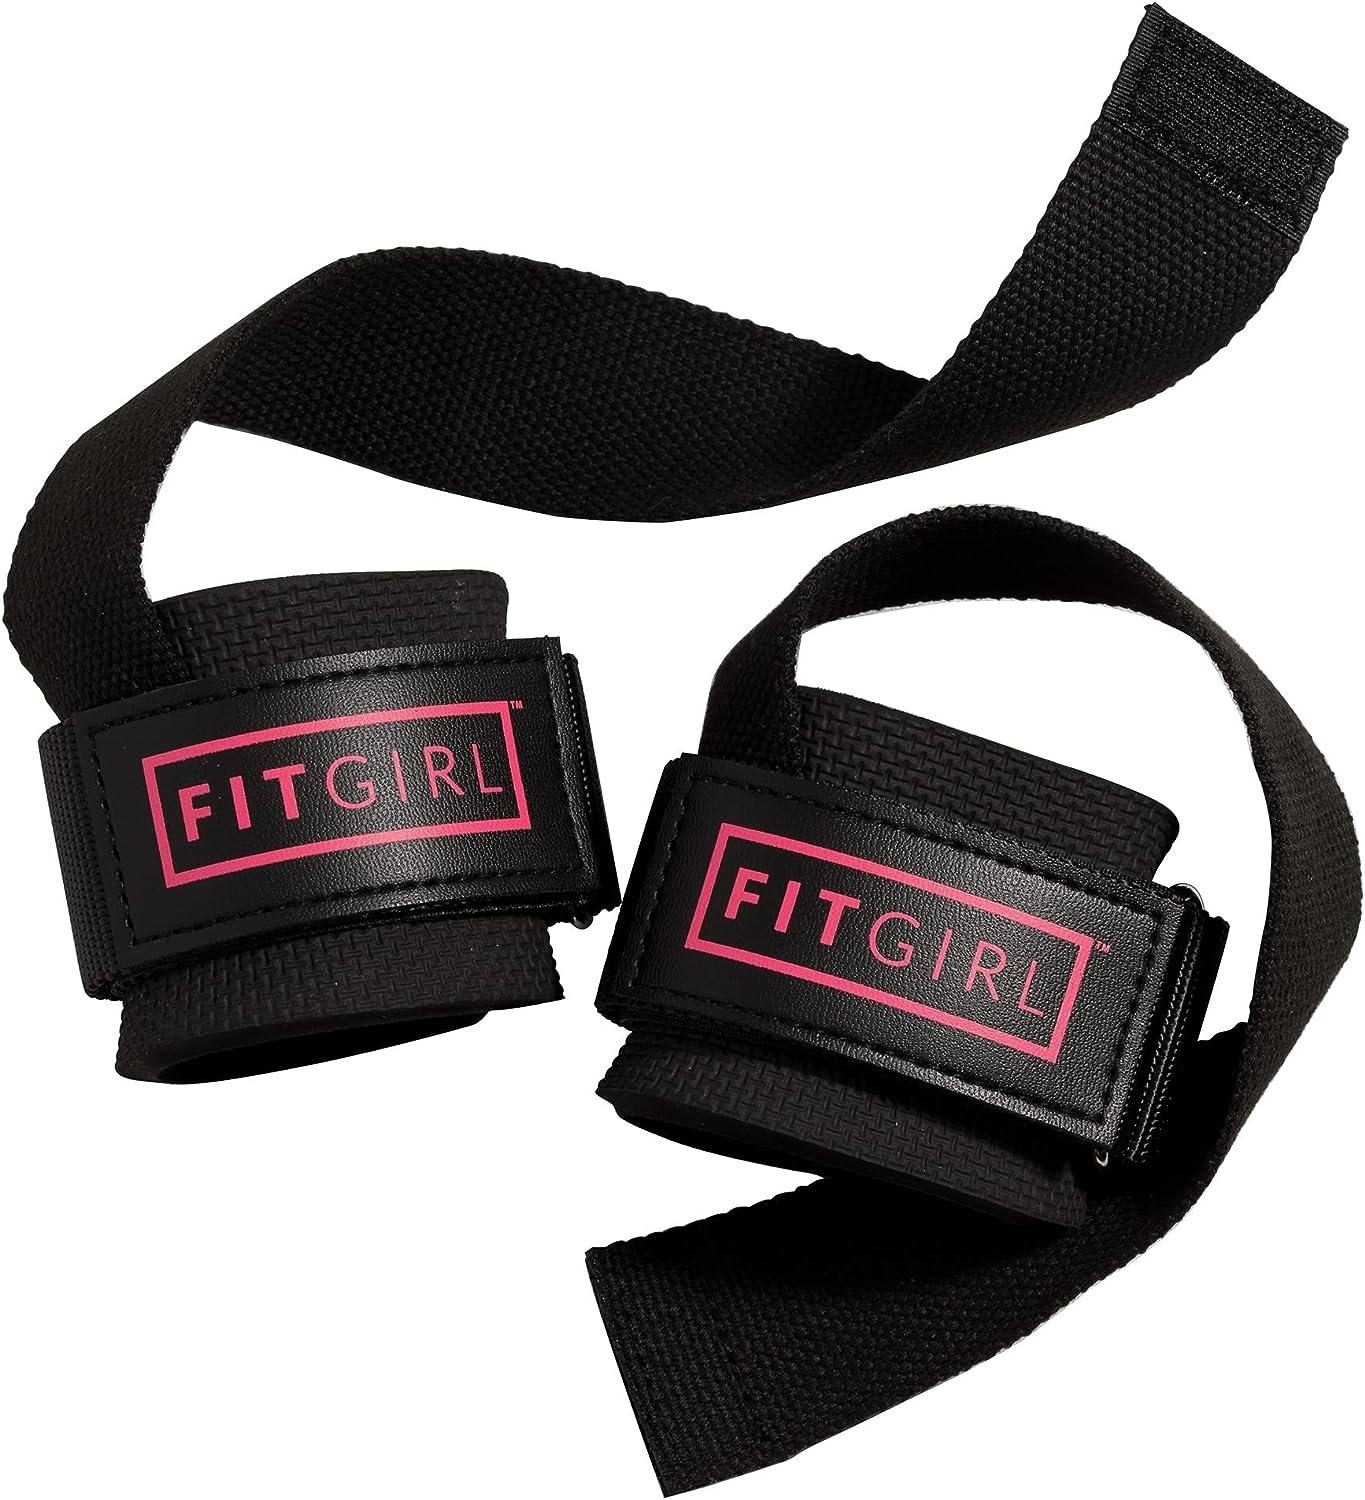 FITGIRL - Wrist Straps for Weightlifting for Women, Gym Lifting Wraps to  Improve Muscle Gain for Legs, Back, Shoulders, Core Black